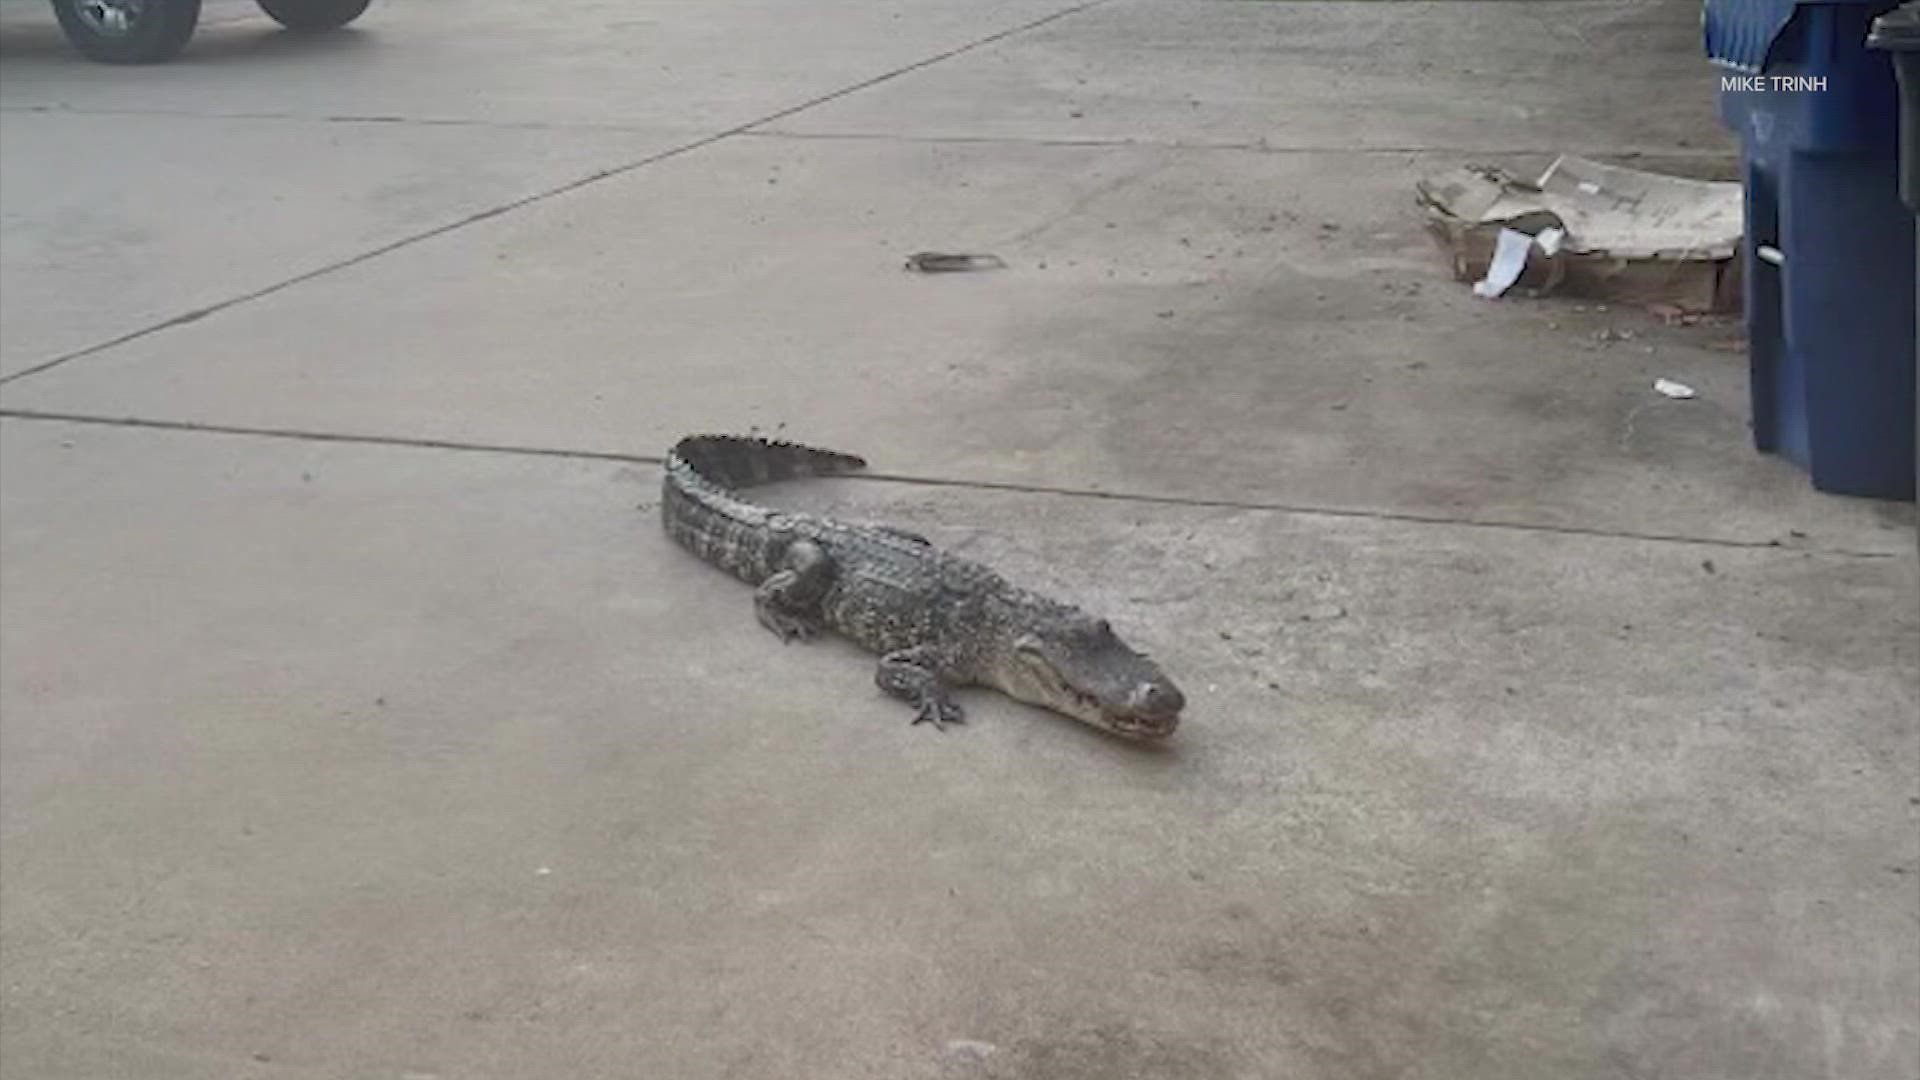 When Mike Trinh's daughters went outside to get in the car, they realized a gator was in the driveway blocking their path. No worries. Dad to the rescue!